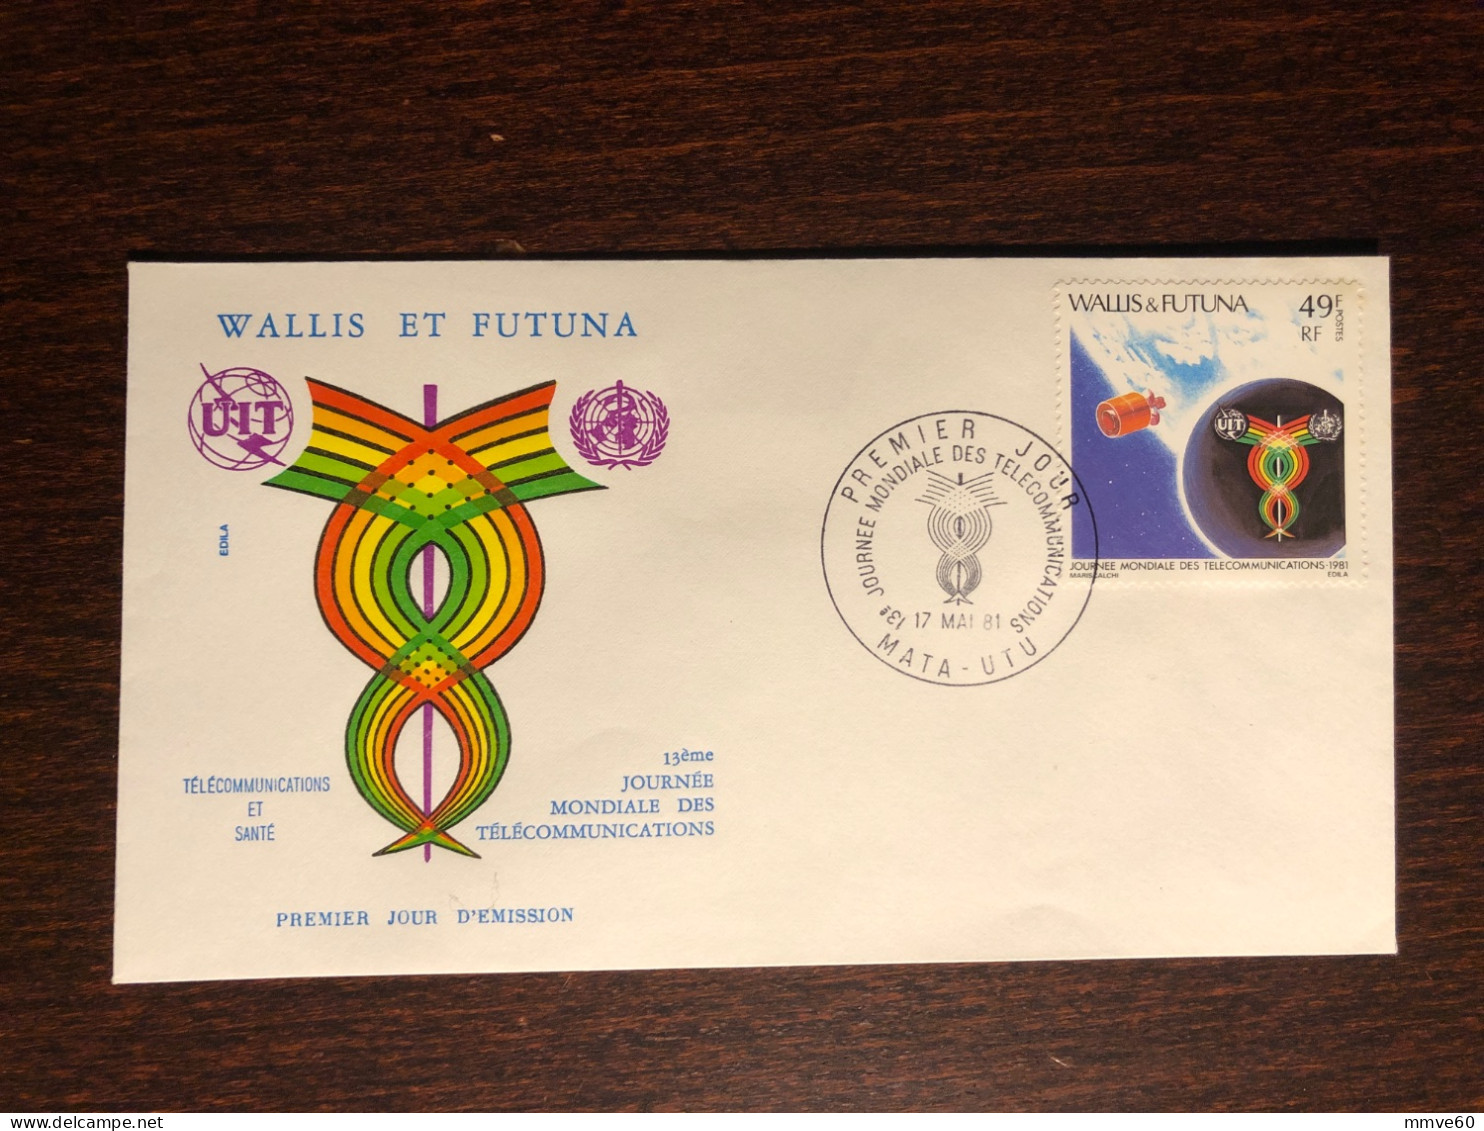 WALLIS & FUTUNA FDC COVER 1981 YEAR TELECOMMUNICATIONS & HEALTH MEDICINE STAMPS - Lettres & Documents